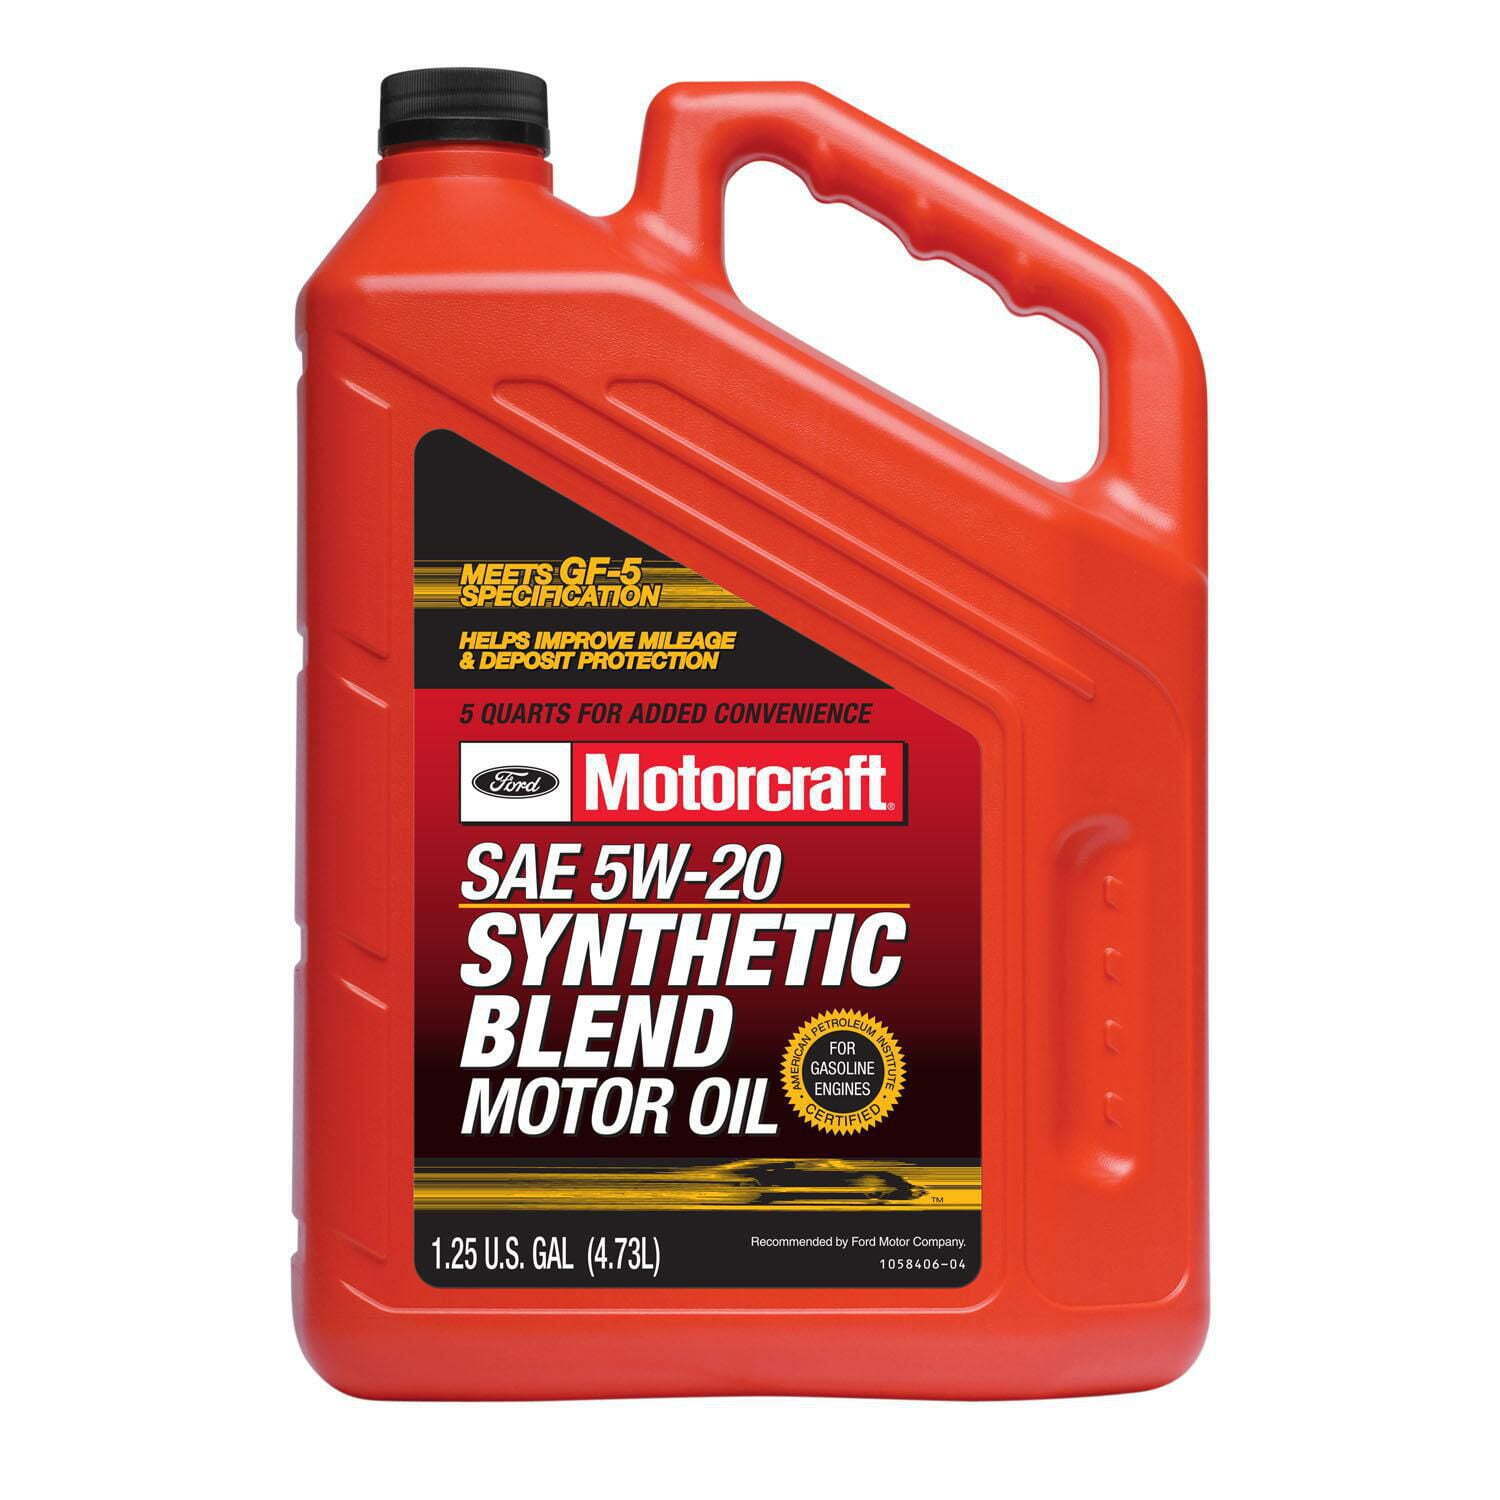 Synthetic Blend Motor Oil, 5W-20 - A premium-quality motor oil specifically 